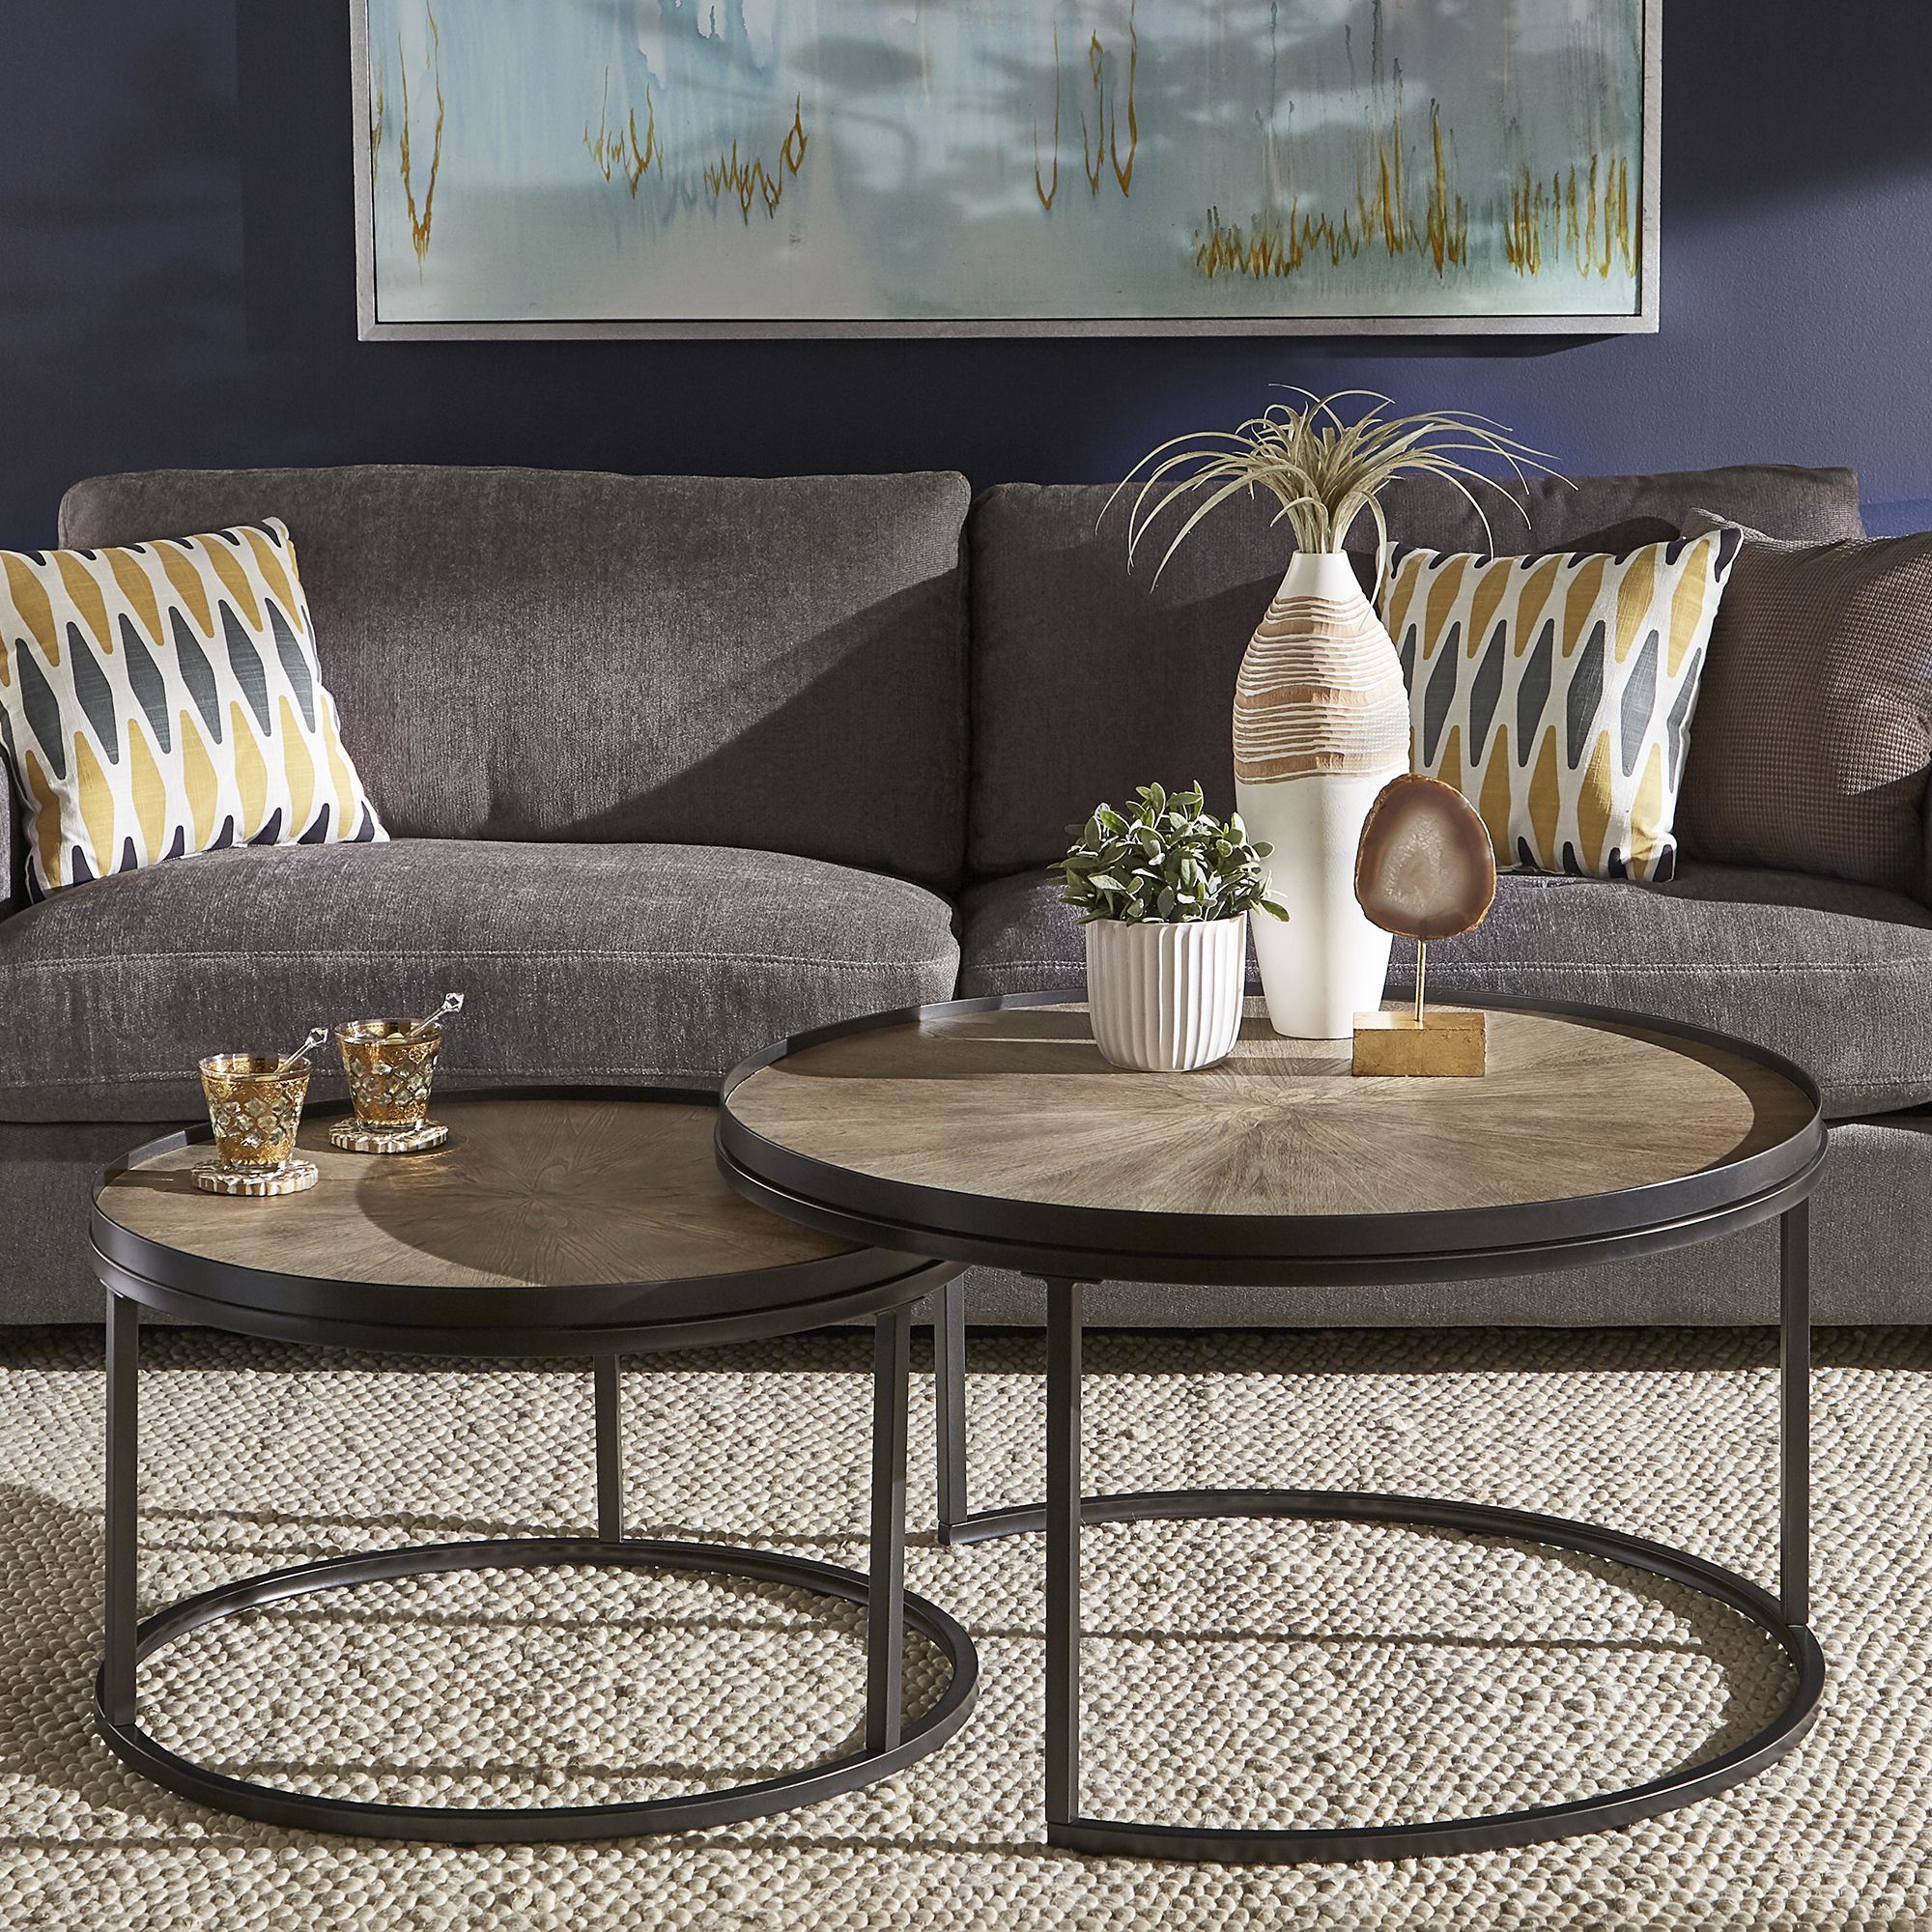 Weston Home Bluff Grey Oak Finish Round Nesting Coffee In Black And Oak Brown Coffee Tables (View 4 of 15)